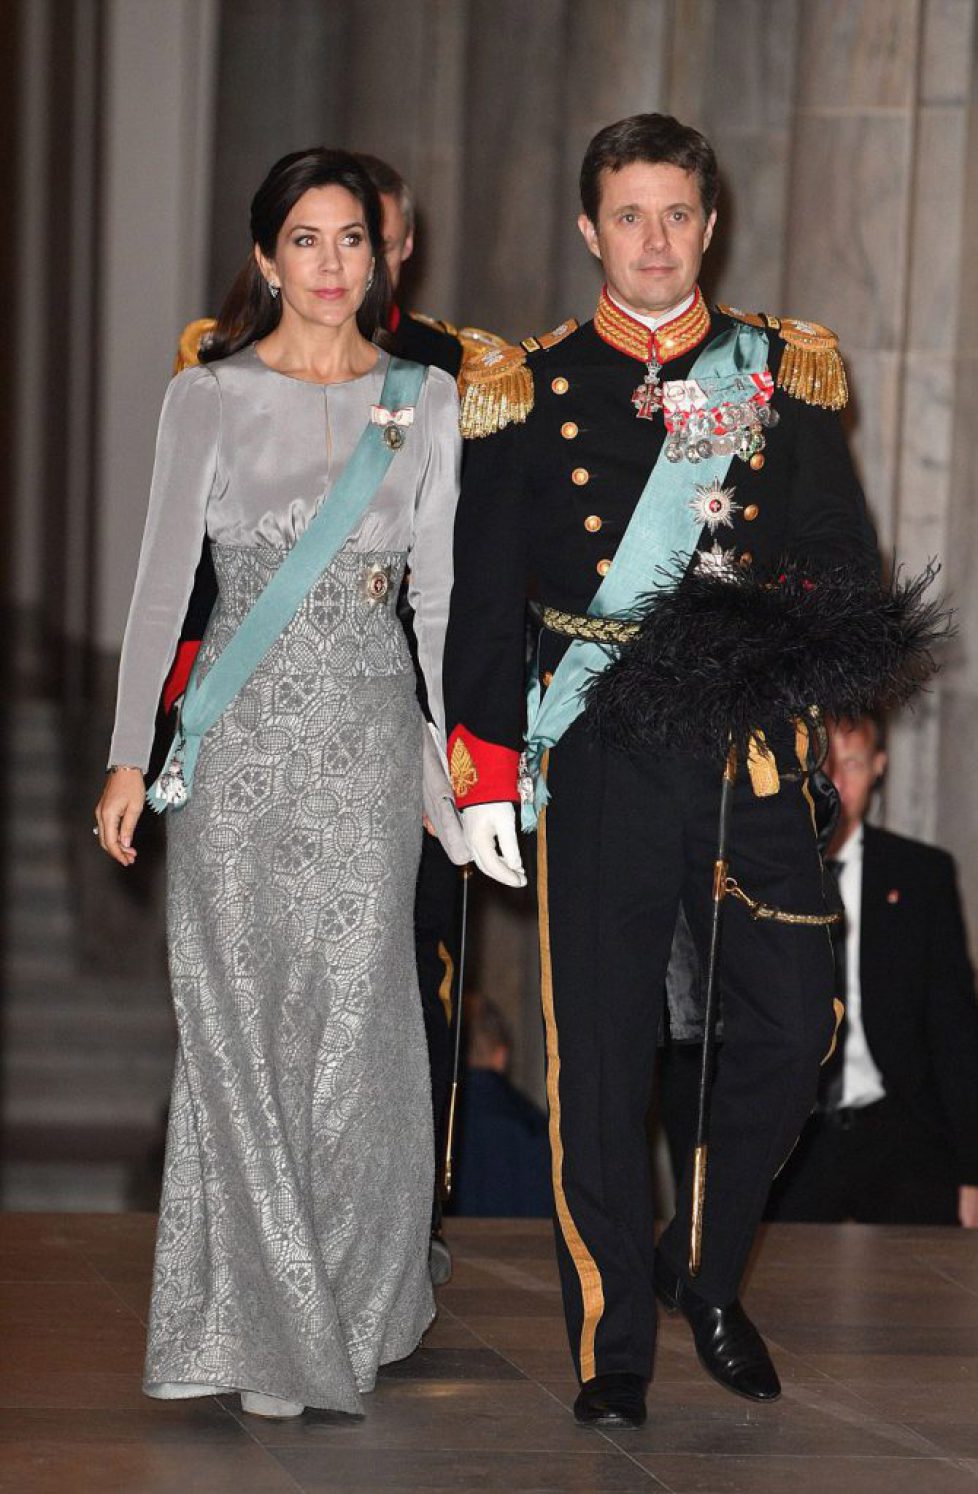 3BCDF34000000578-4084080-Crown_Princess_Mary_and_Crown_Prince_Frederik_Diplomatic_recepti-a-6_1483453685627